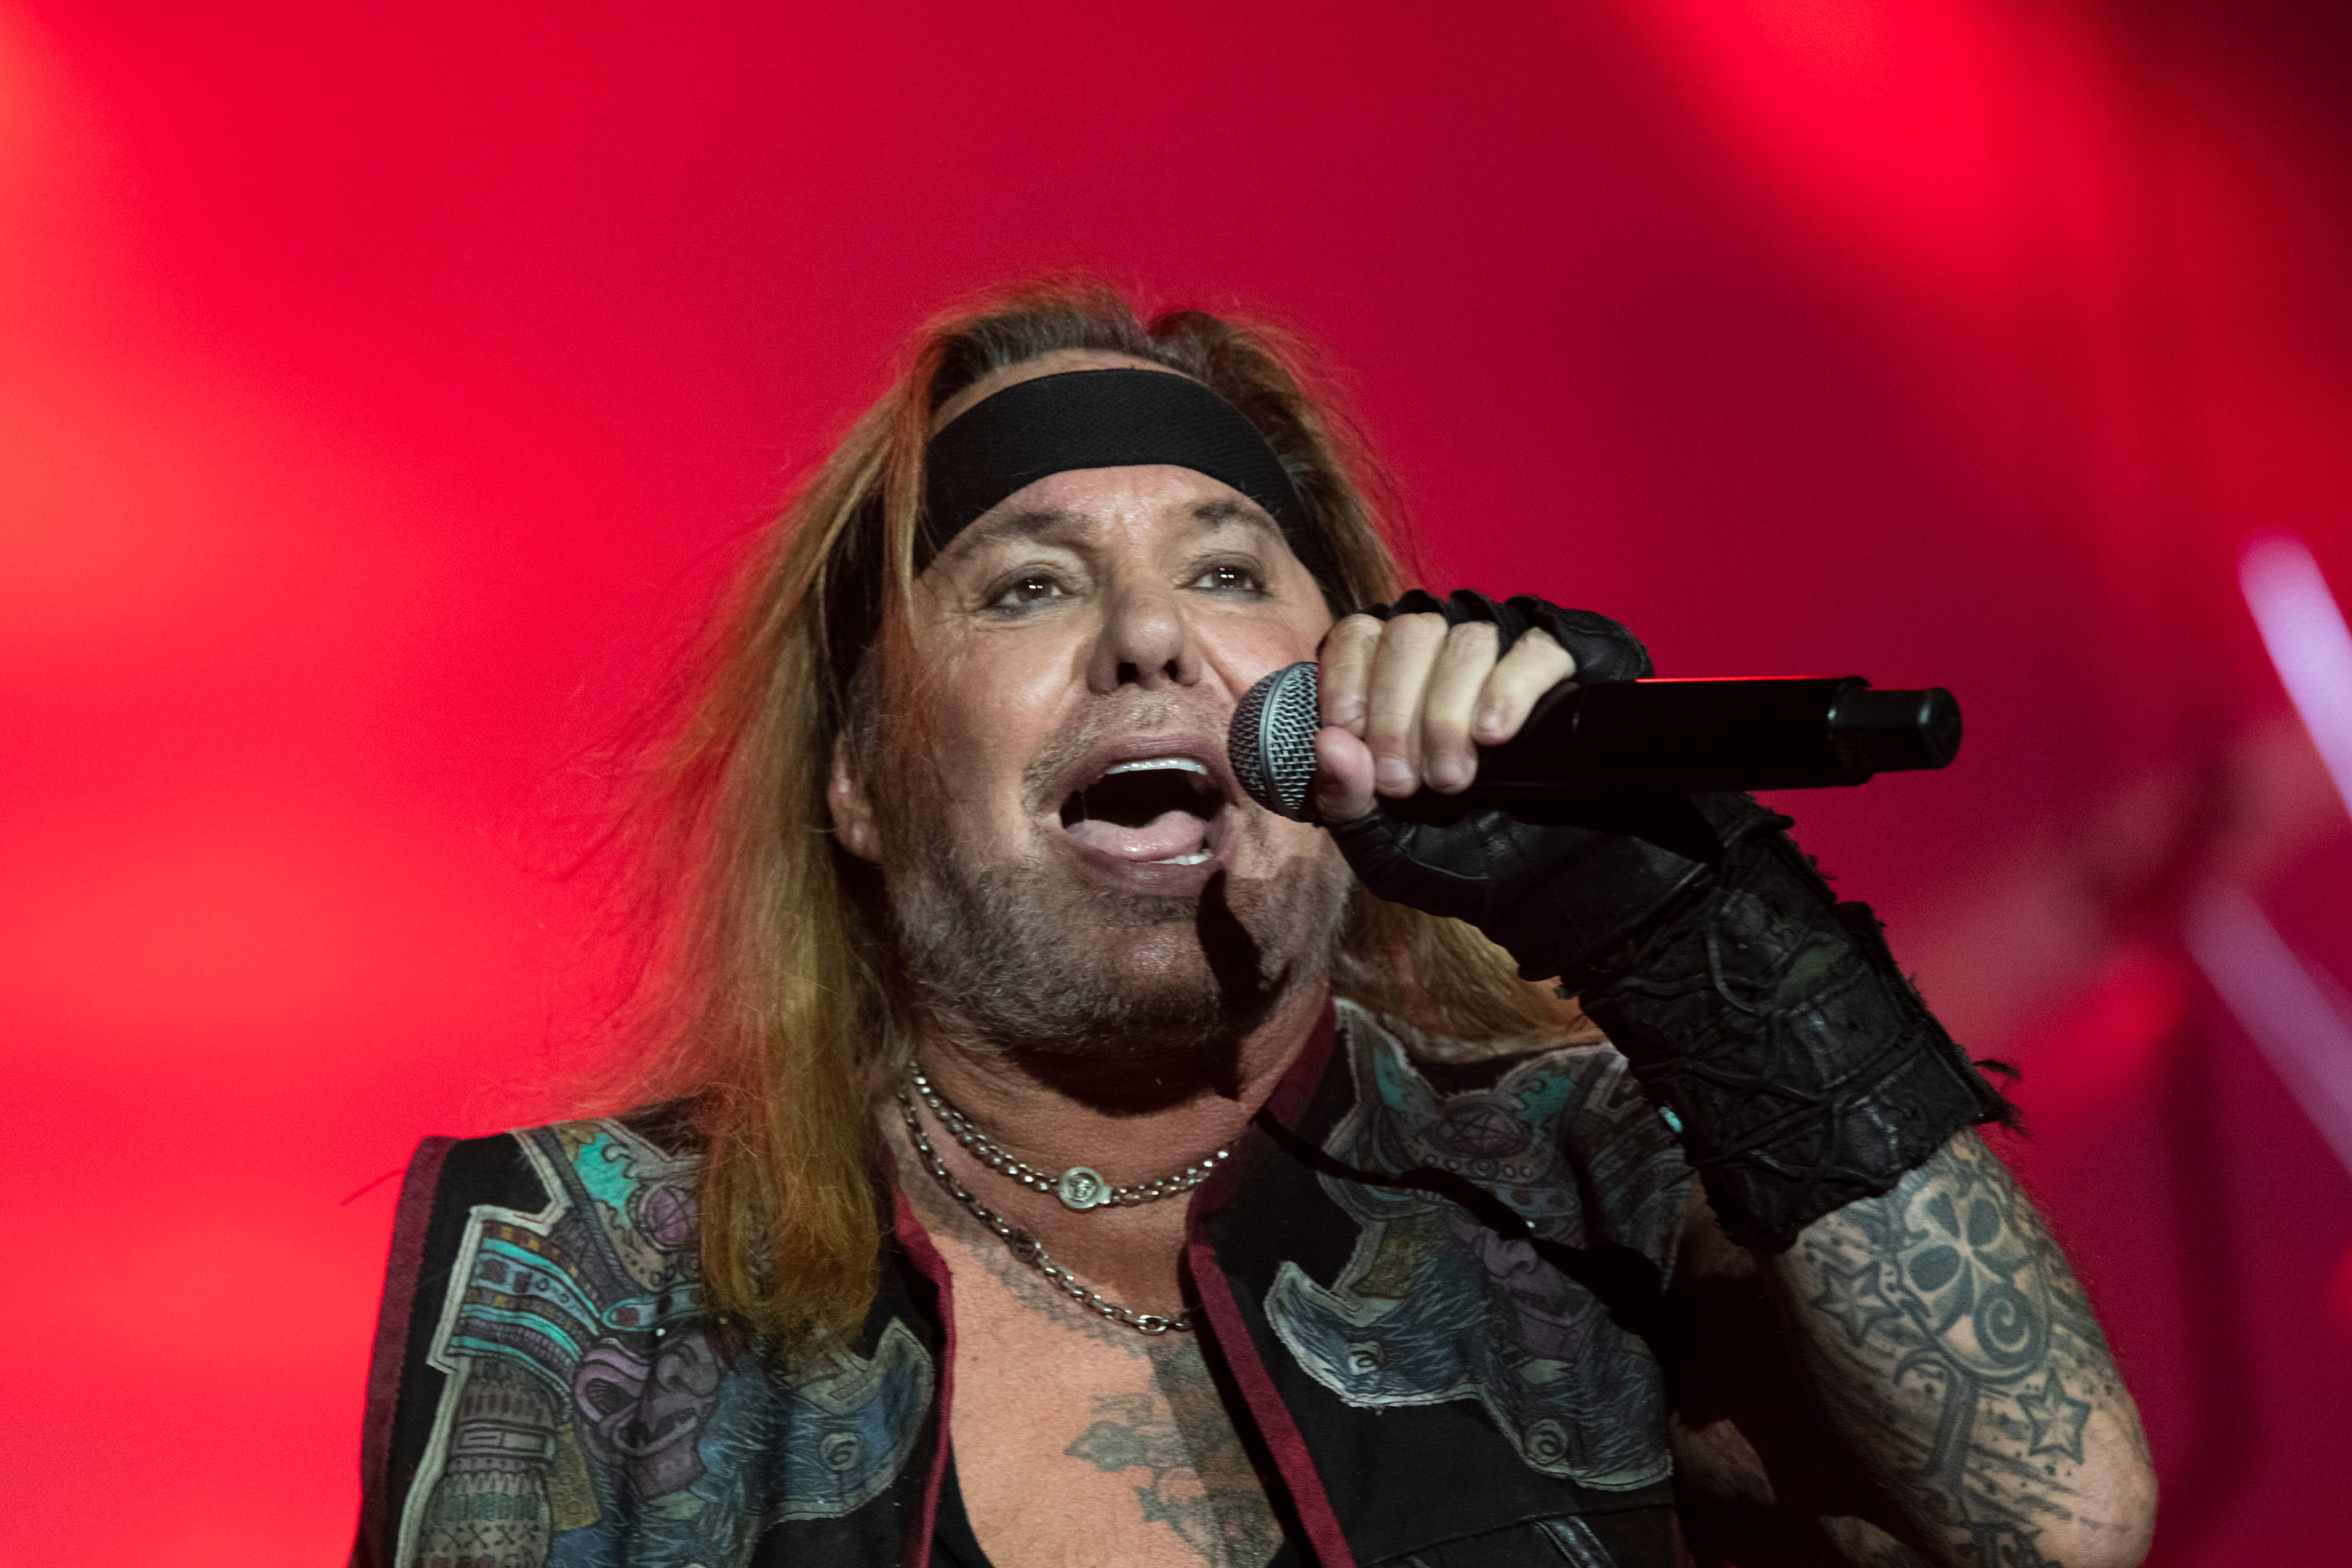 Motley Crue singer Vince Neil sings Shout at the Devil as 80’s rock legends Def Leppard and Motley Crue headline the Stadium Tour at Comerica Park in Detroit on Sunday, July 10, 2022.